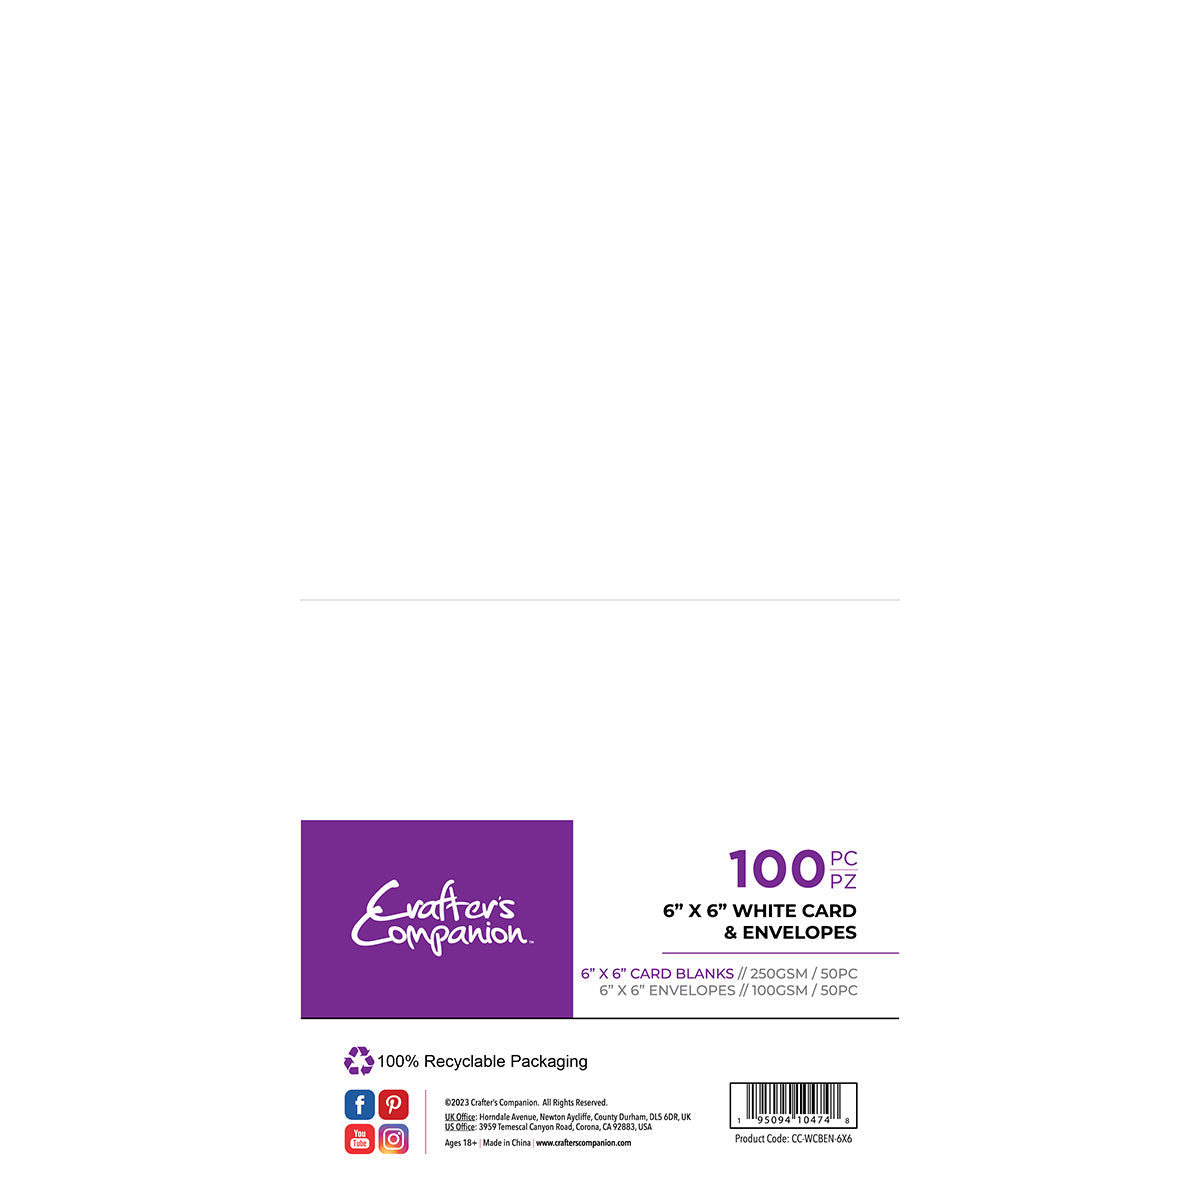 Crafter's Companion - 6"x 6" Card & Envelopes 100 piece - White